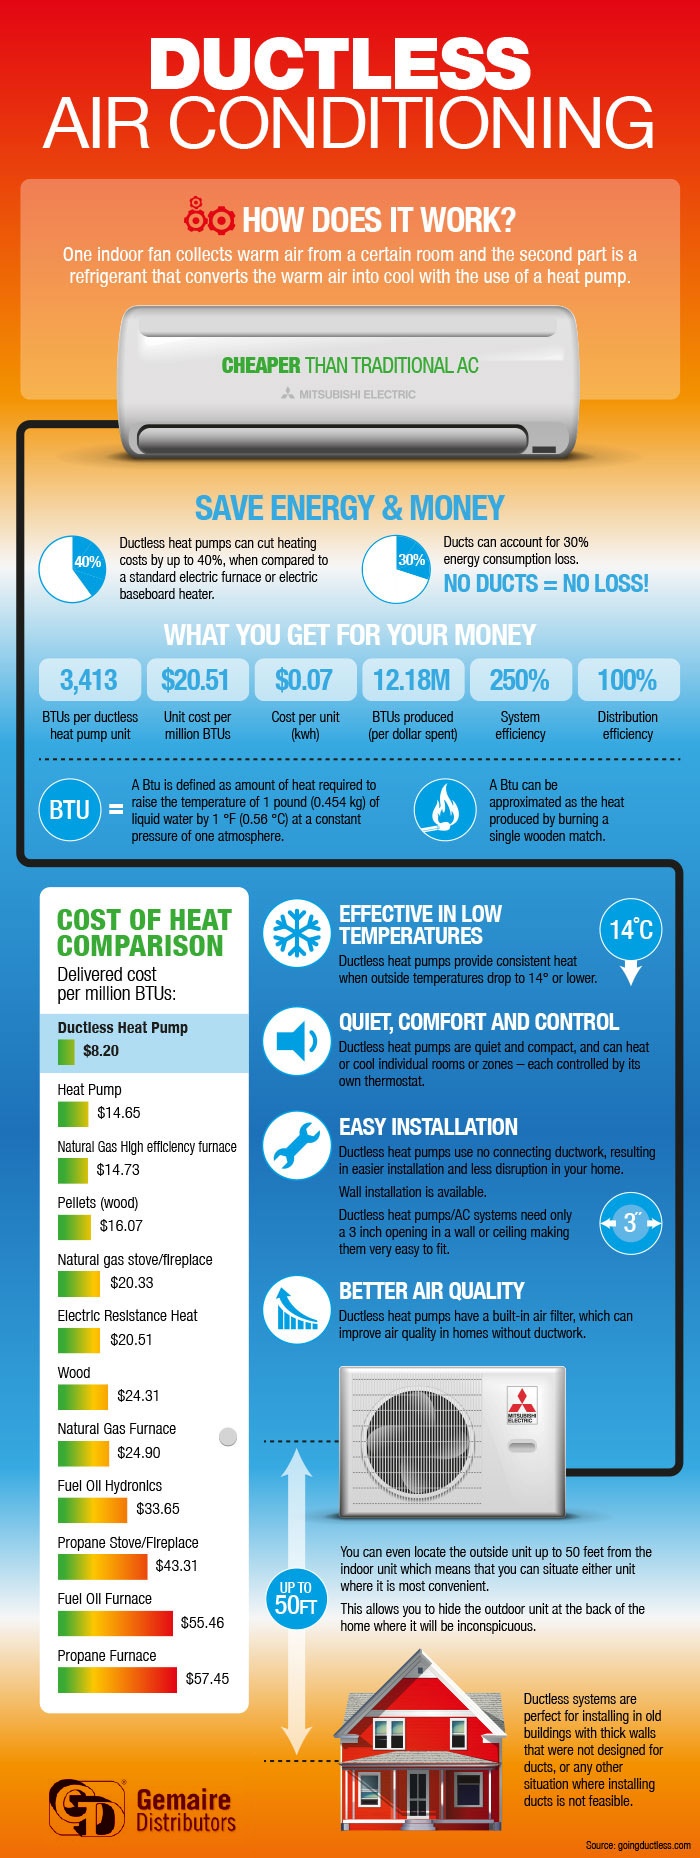 How Much Does Ductless Air Conditioning Cost To Install ...